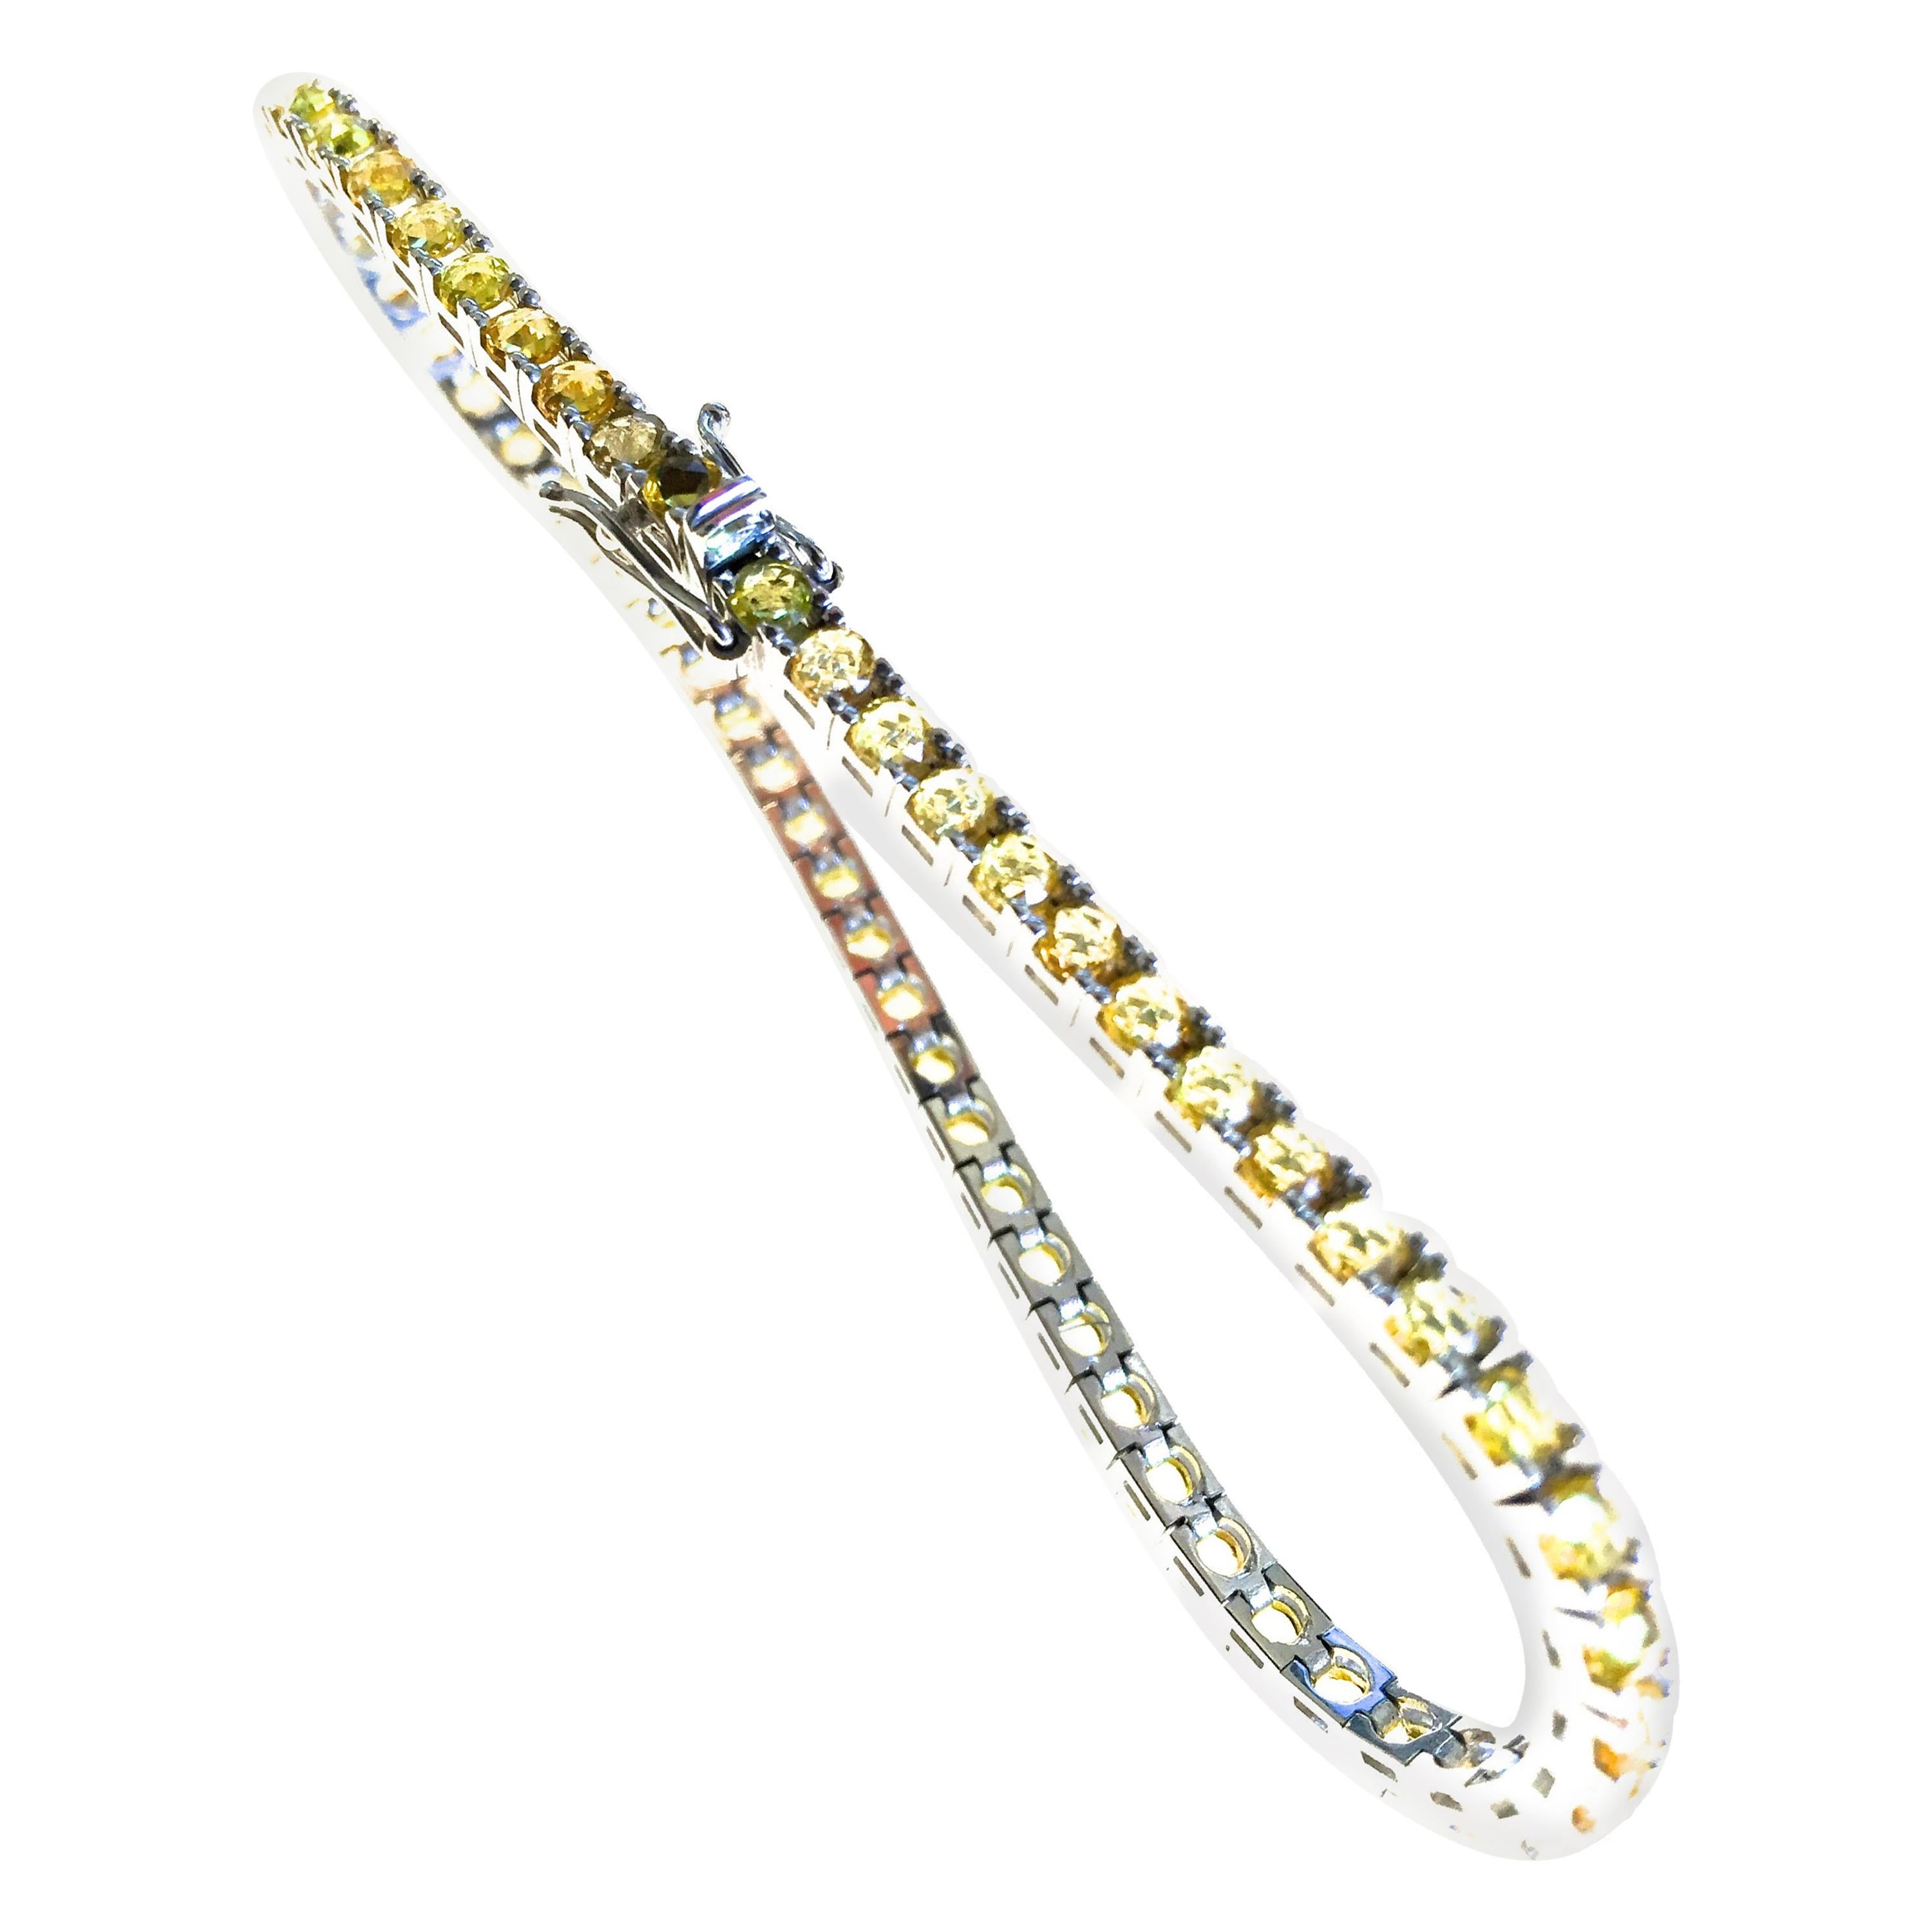 Yellow Sapphire 4.42 Carats in 18kt White Gold Corone Tennis Bracelet